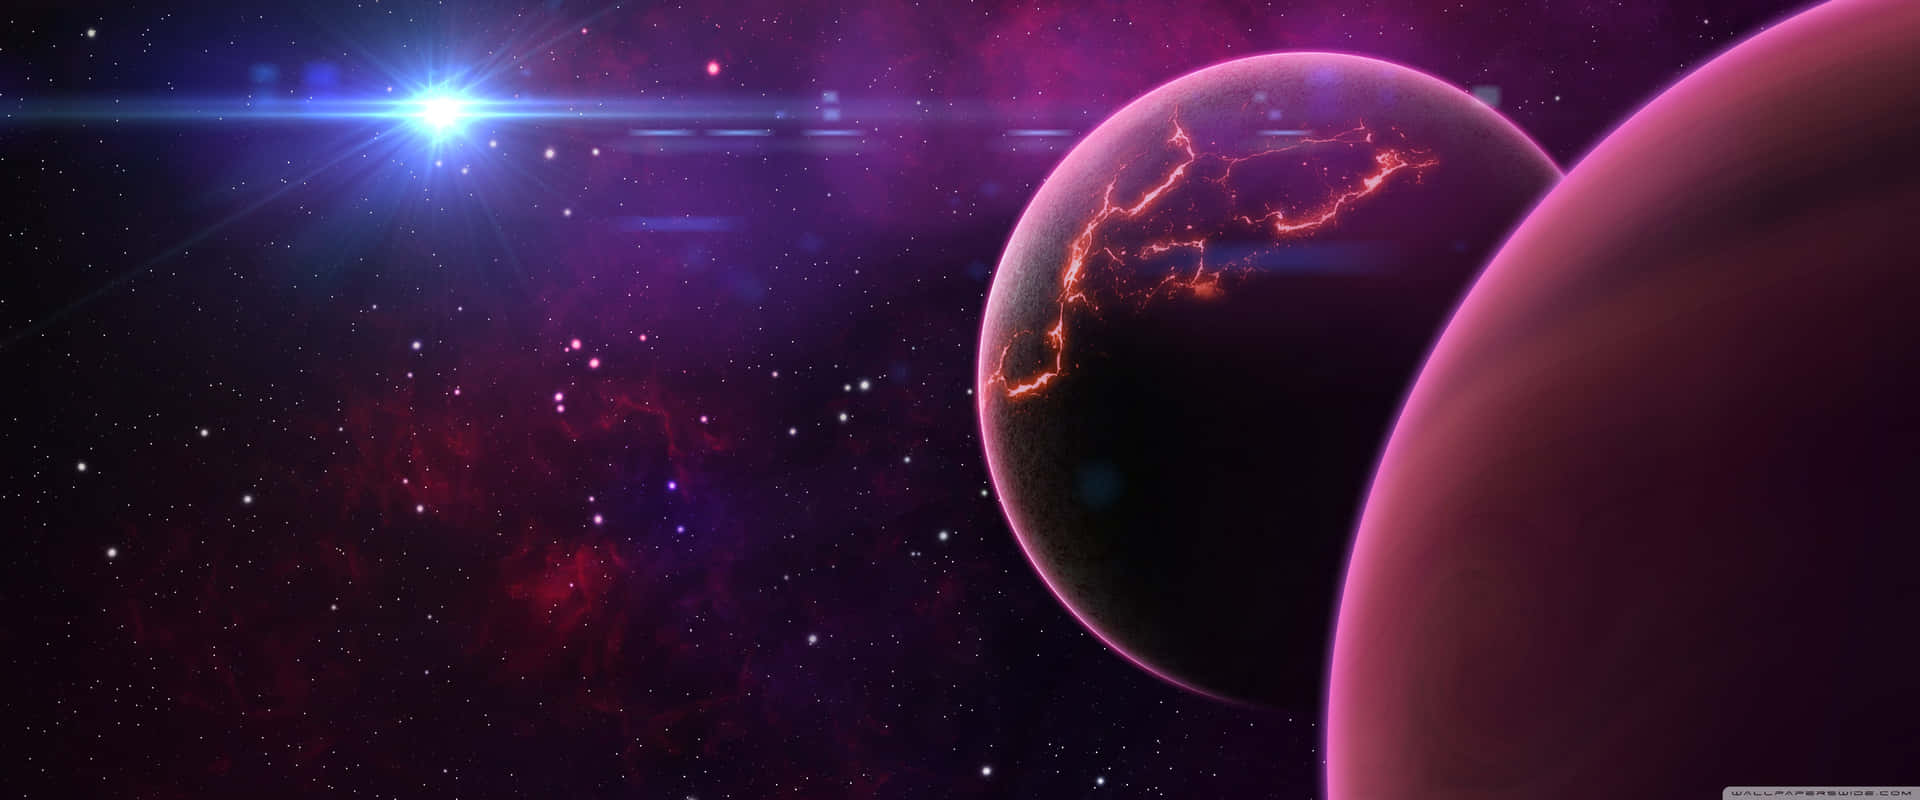 A Space Scene With Two Planets And Stars Wallpaper